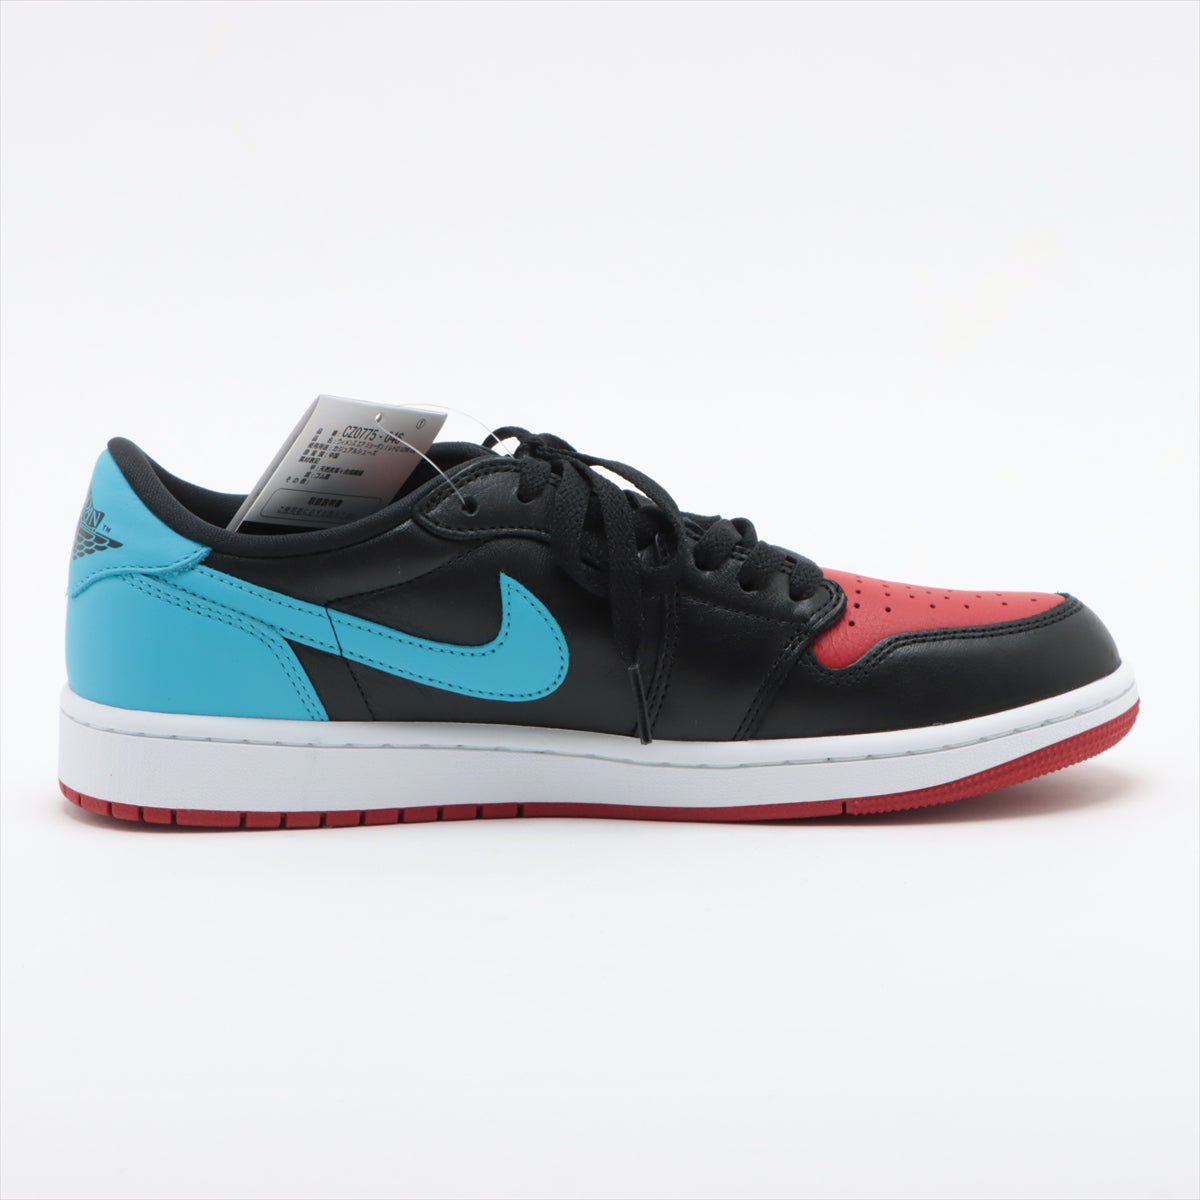 Nike Leather Sneakers 28㎝ Ladies' Multicolor CZ0775-046 AIR JORDAN 1 RETRO LOW OG box Is there a replacement string